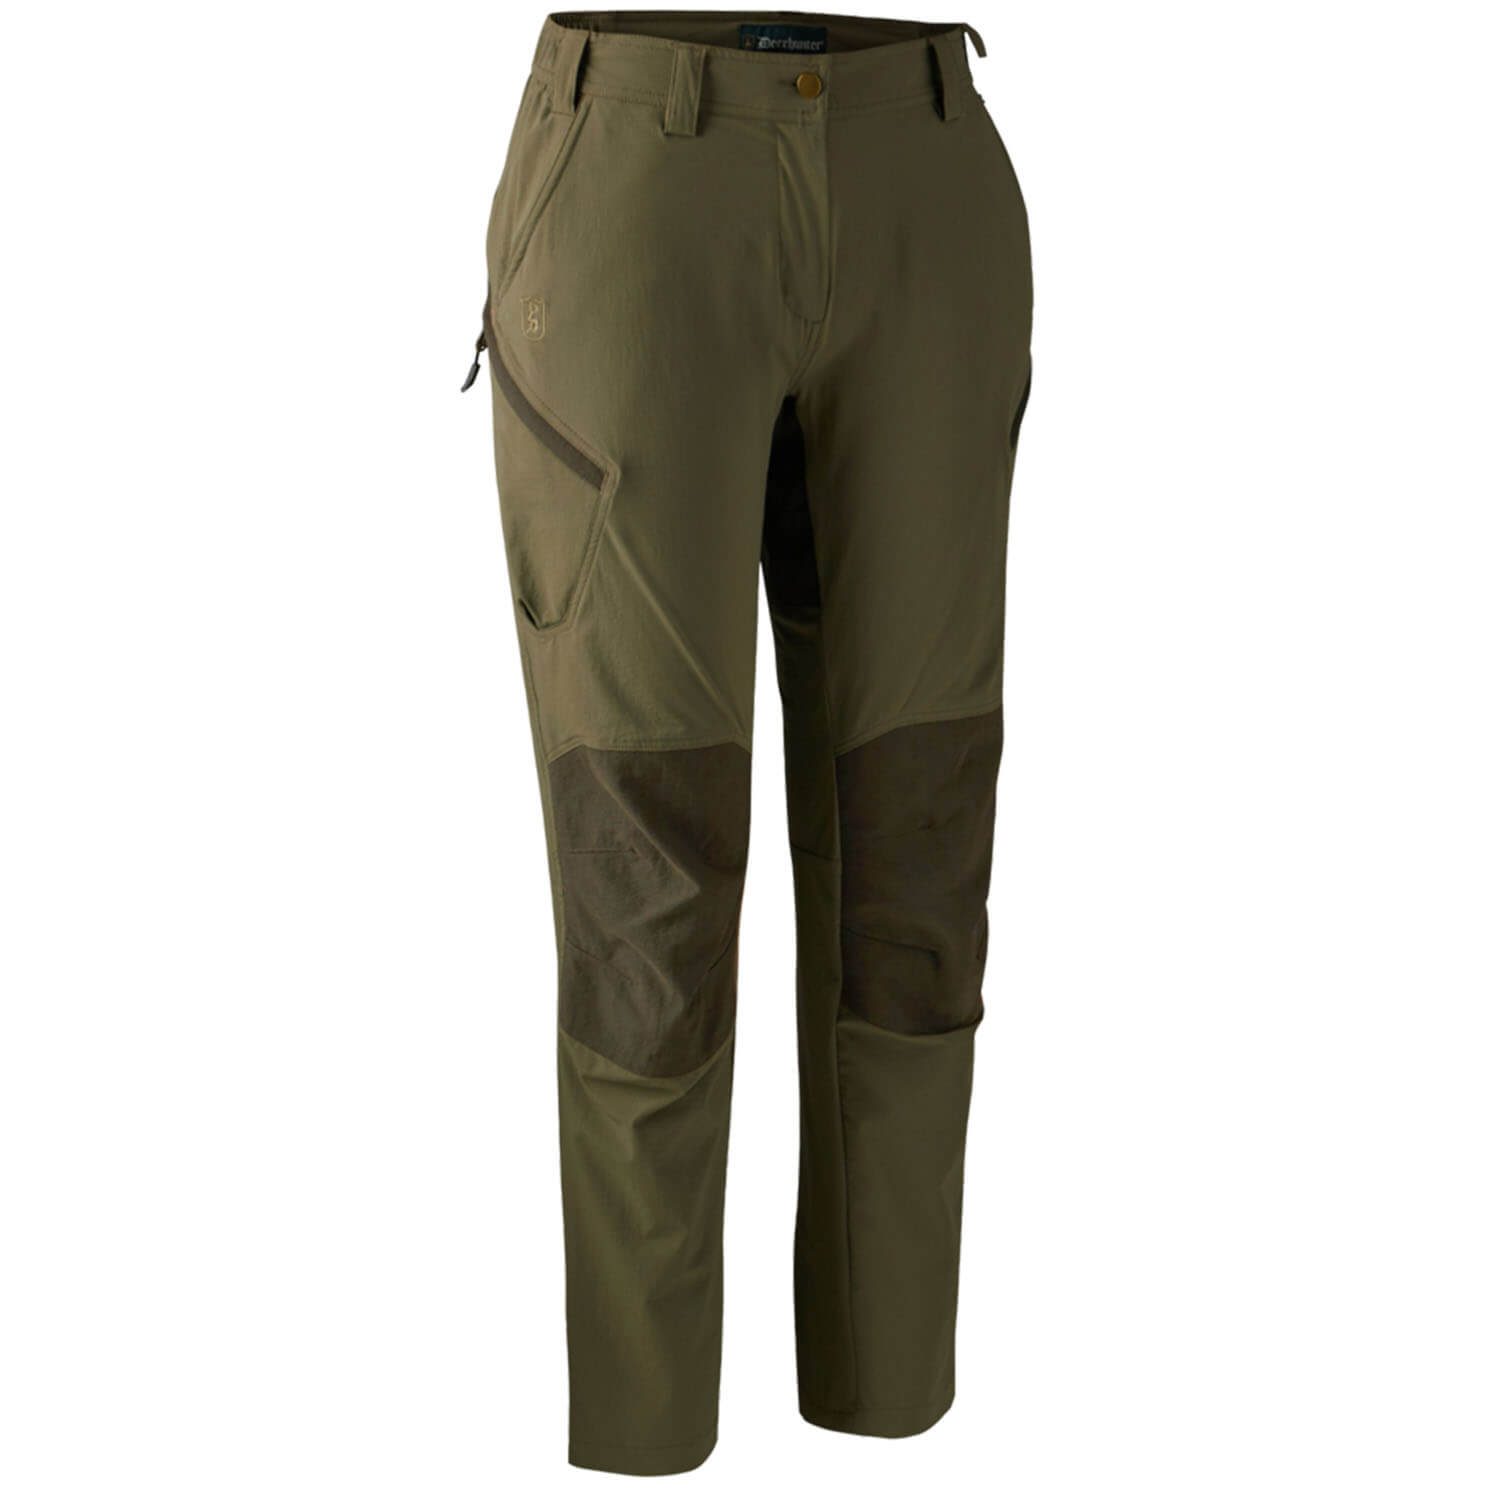 Deerhunter Trousers Lady Anti-Insect - Insect Protection